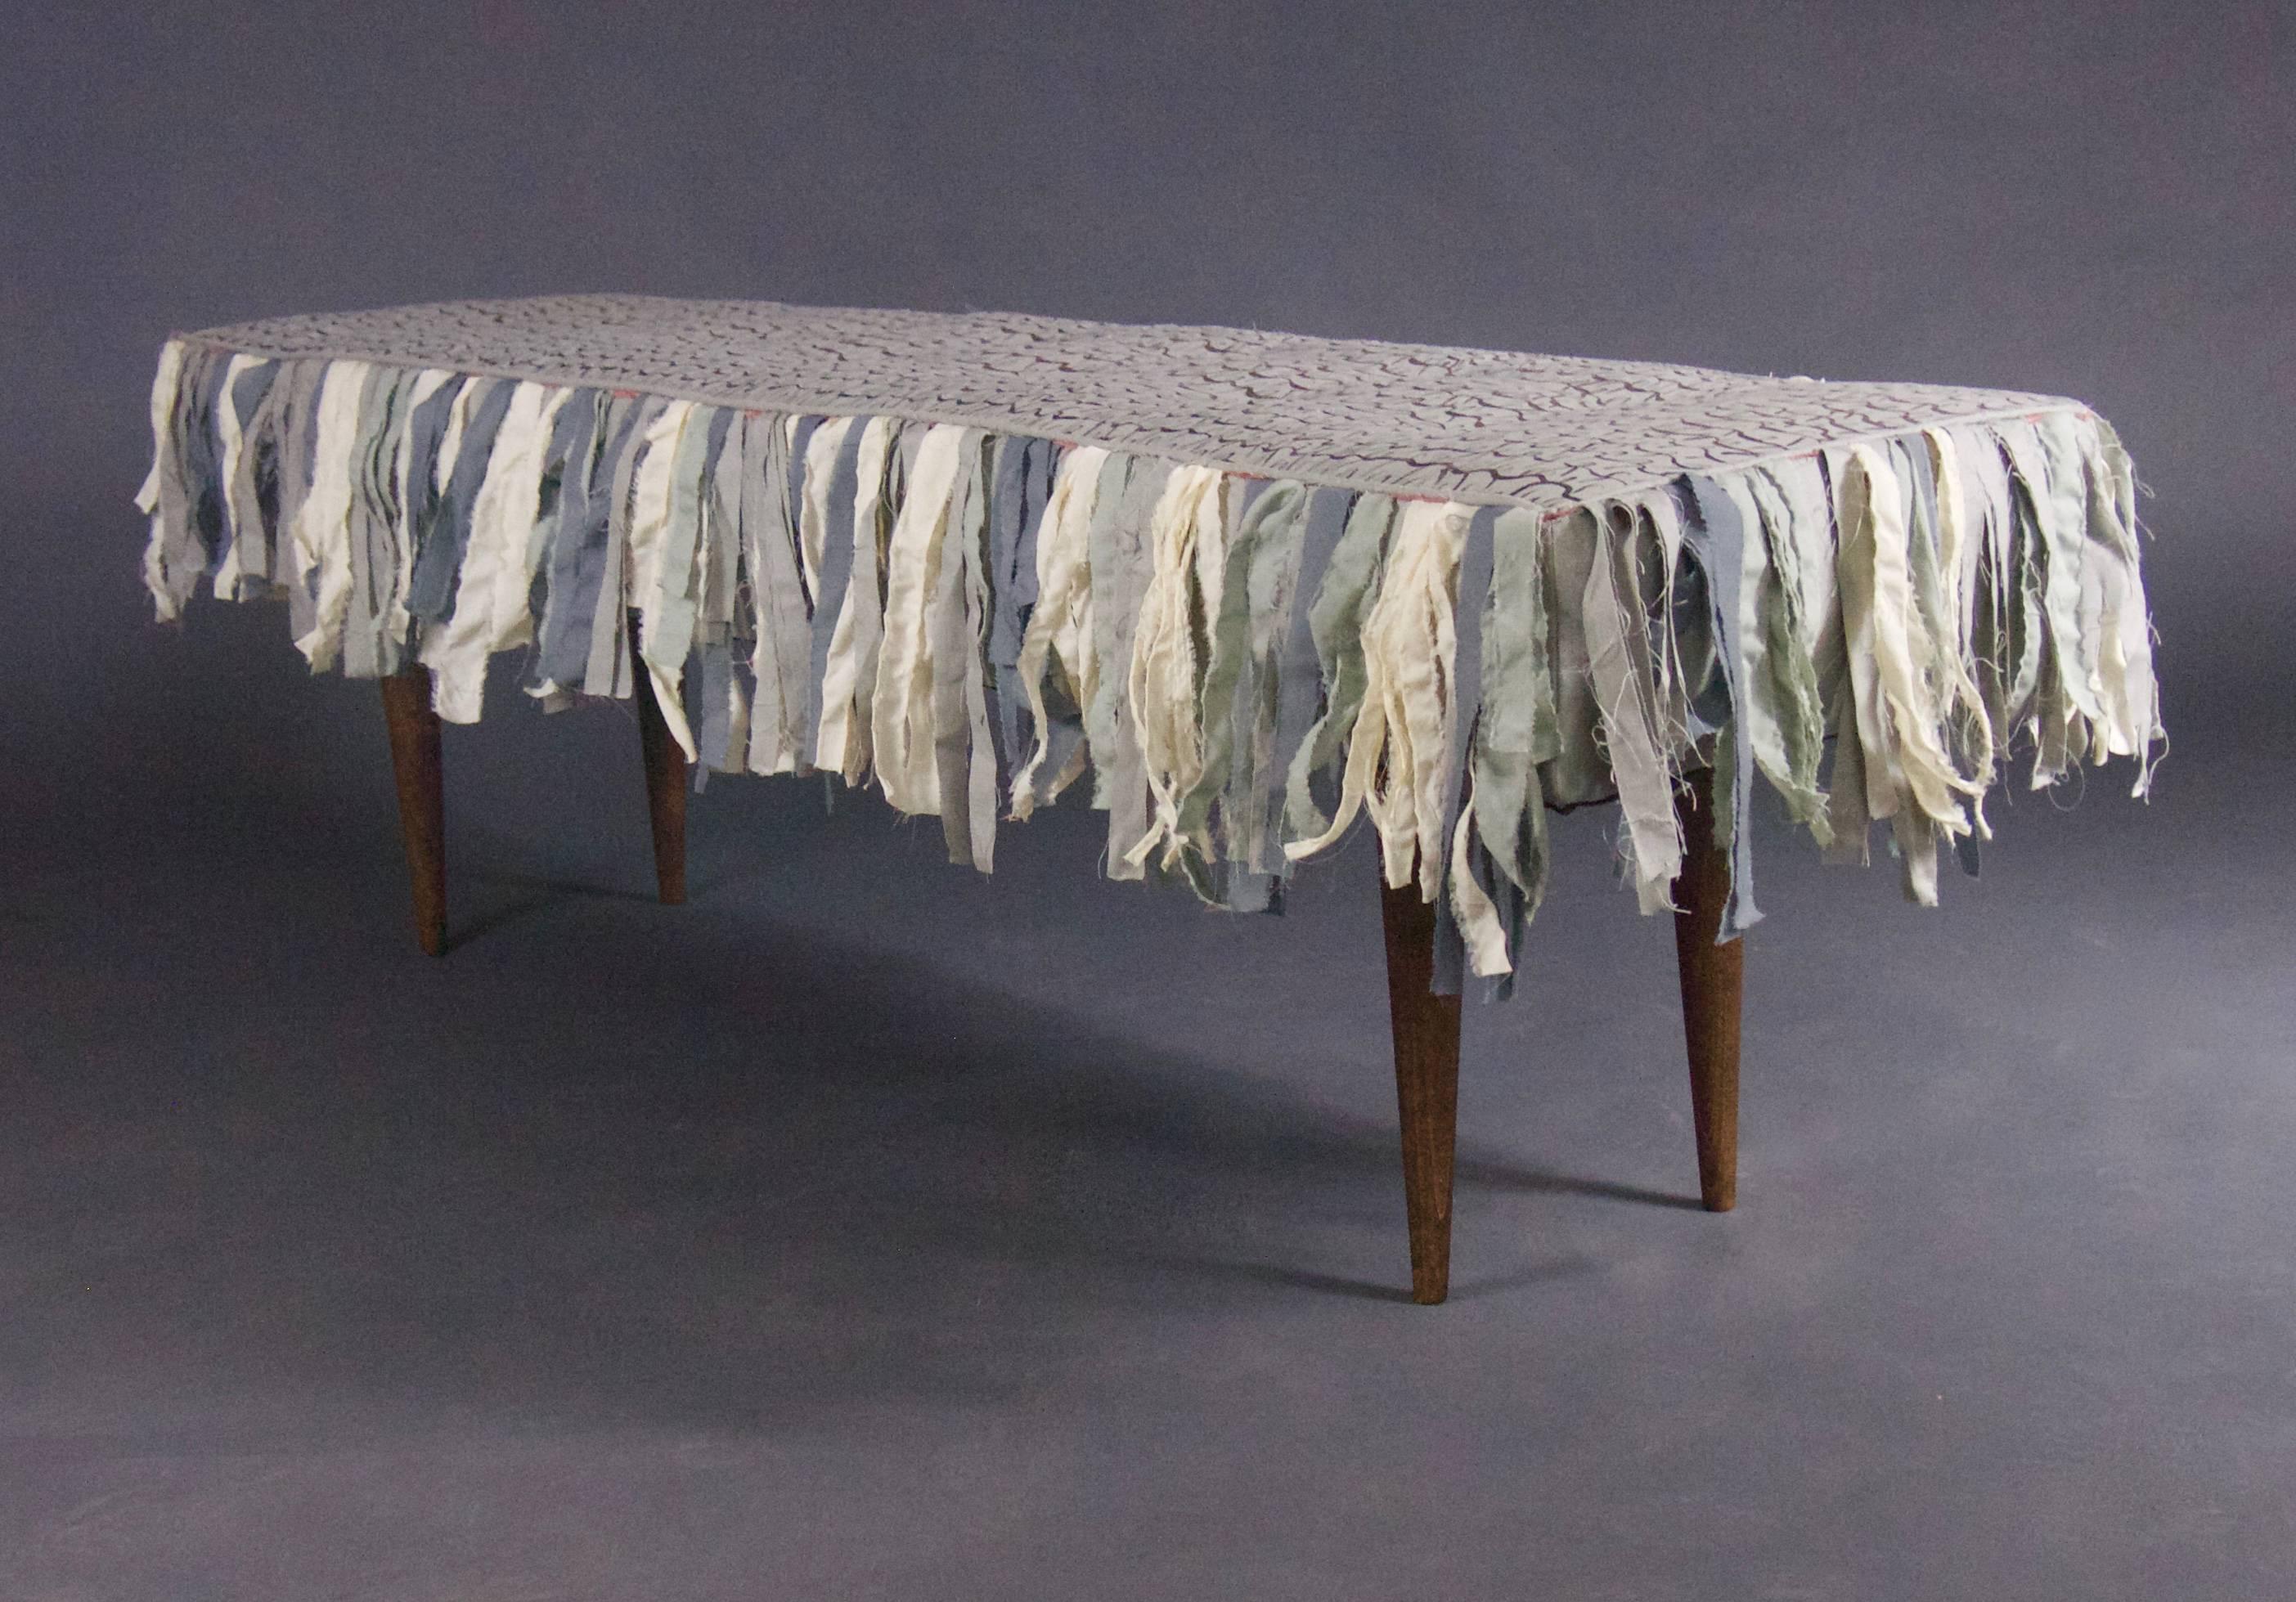 American Handmade Bench with Hand-Painted Textile and Handmade Cotton Fringe